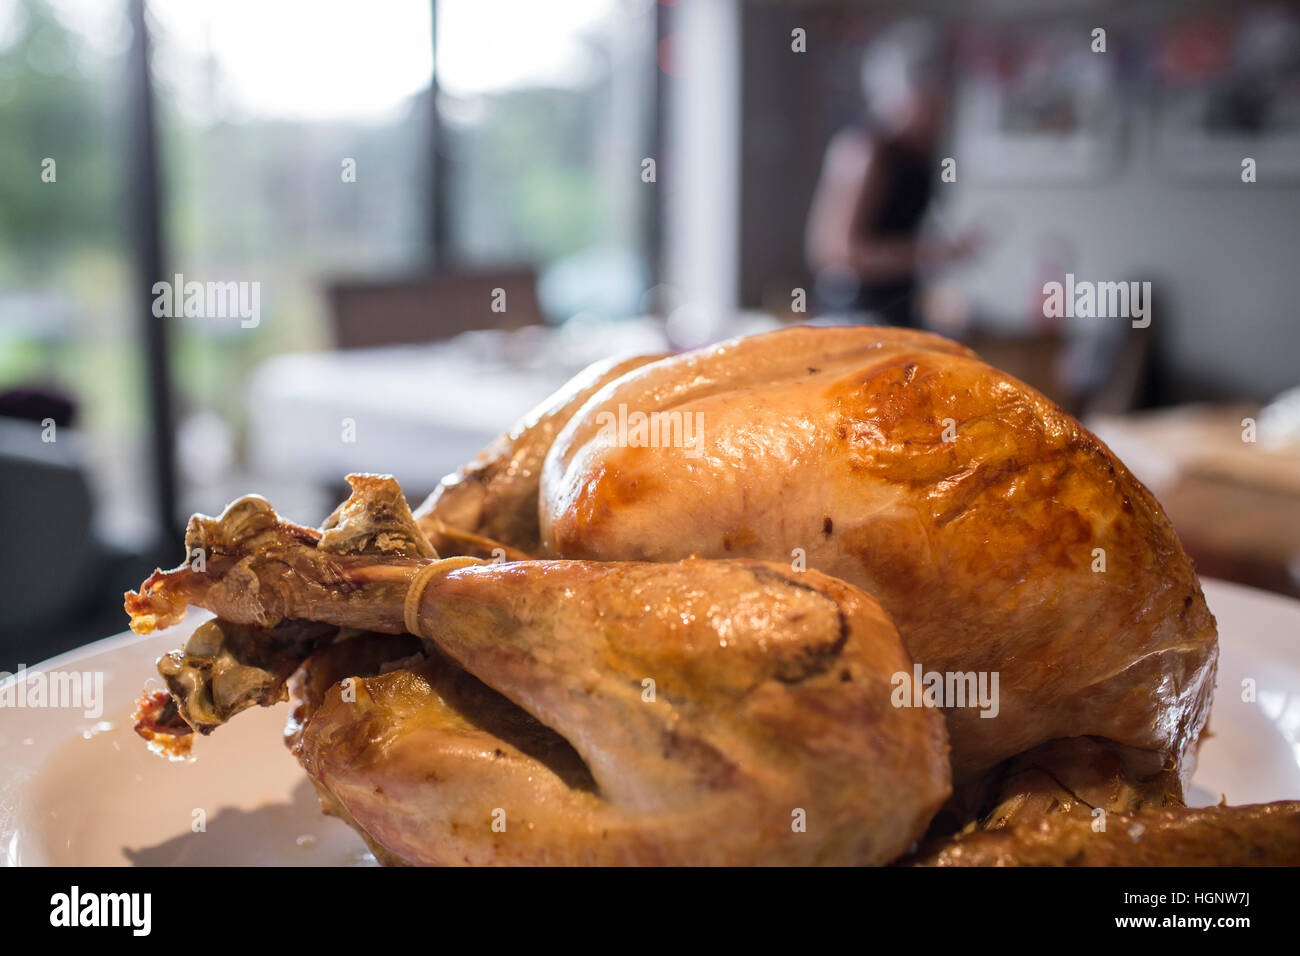 TURKEY THERMOMETER ROAST COOKED TEMPERATURE Cooking meat thermometer  inserted showing ideal temperature (190F) for cooked roast Turkey at  Christmas Stock Photo - Alamy